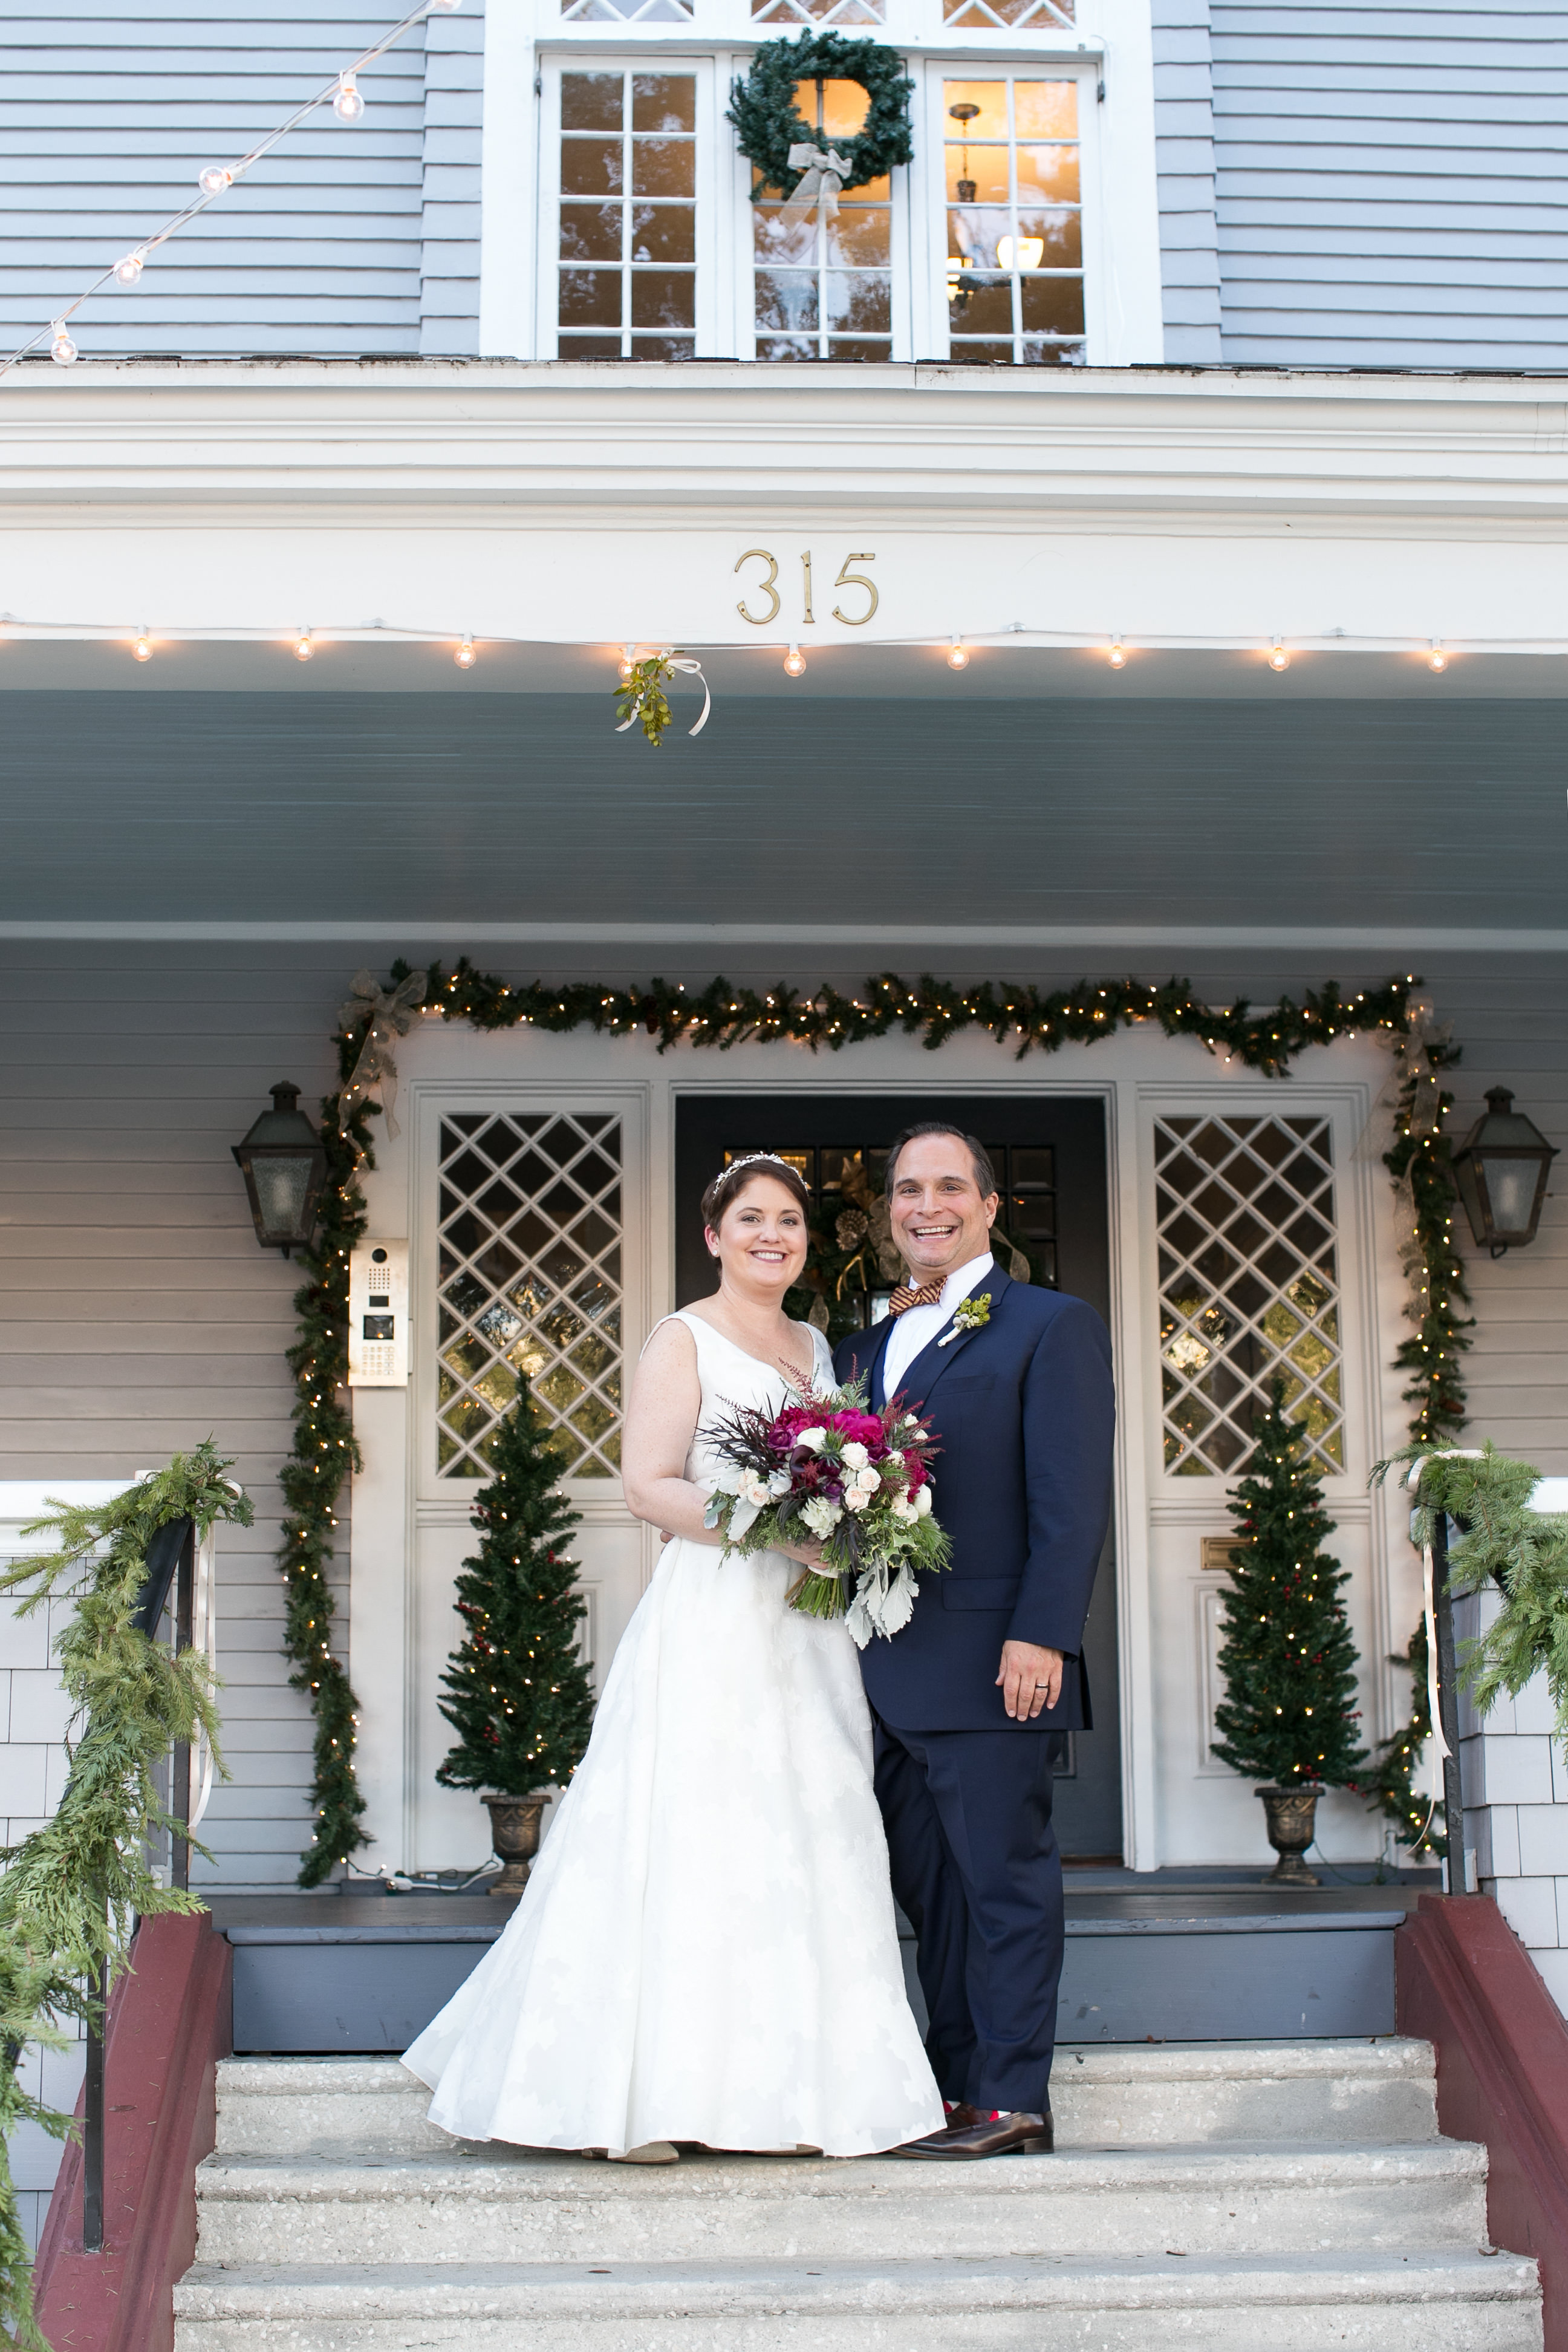 Christmas Wedding Reception Decor, Garland with Lights Around Door of Wedding Venue The Orlo House, Bride and Groom Wedding Portrait | Tampa Bay Wedding Photographer Carrie Wildes Photography